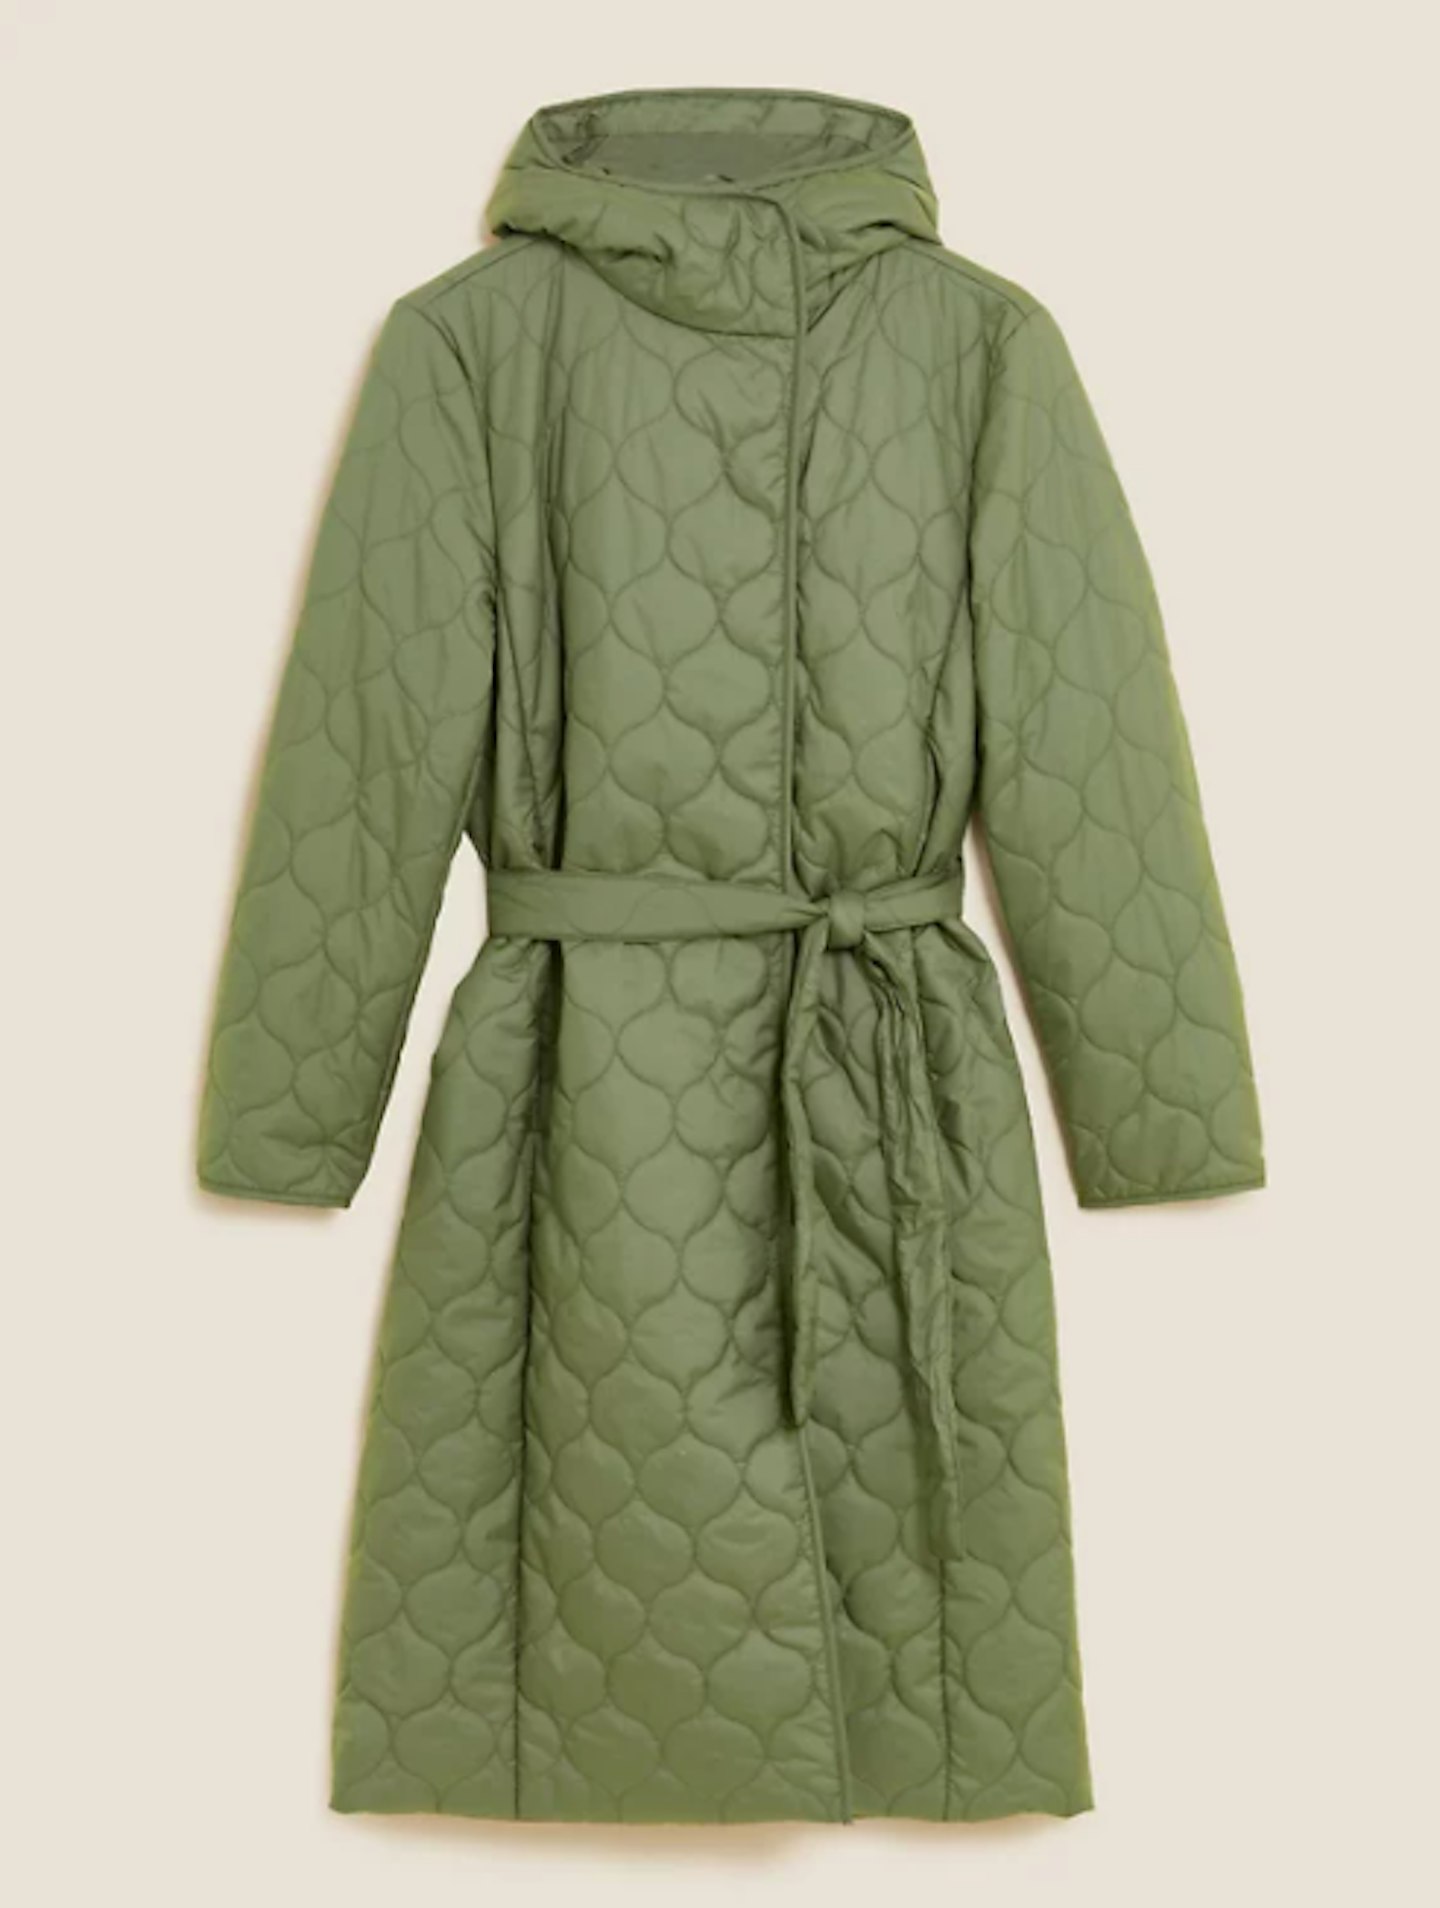 The Quilted Coat